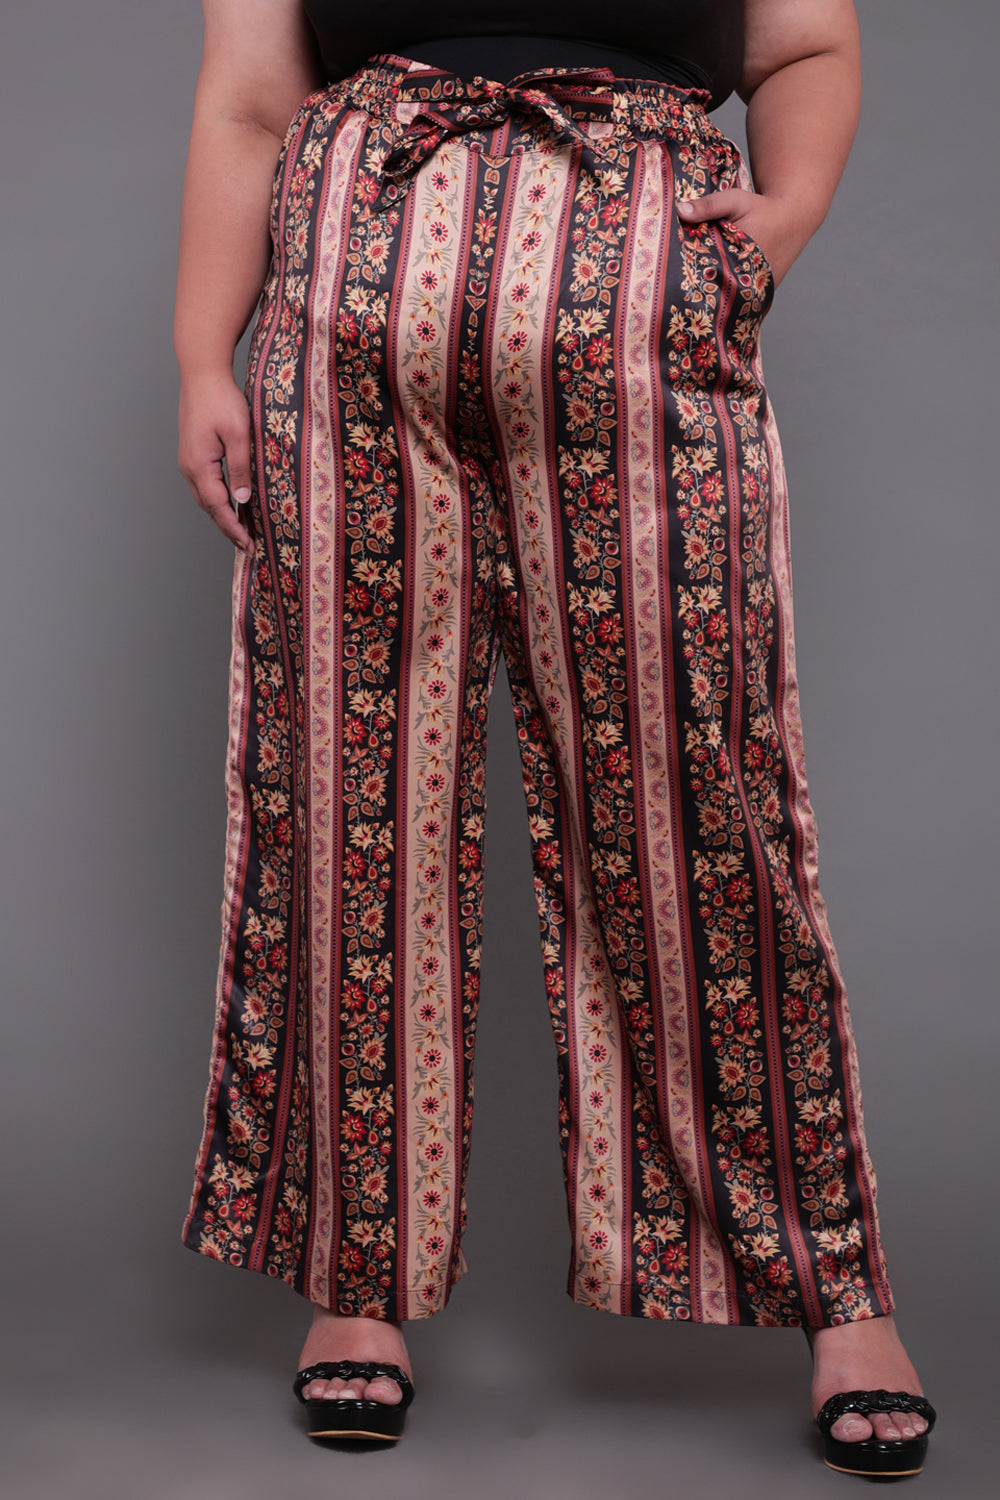 Plus Size Beige Ethnic Print High Waise Satin Pants Online in India